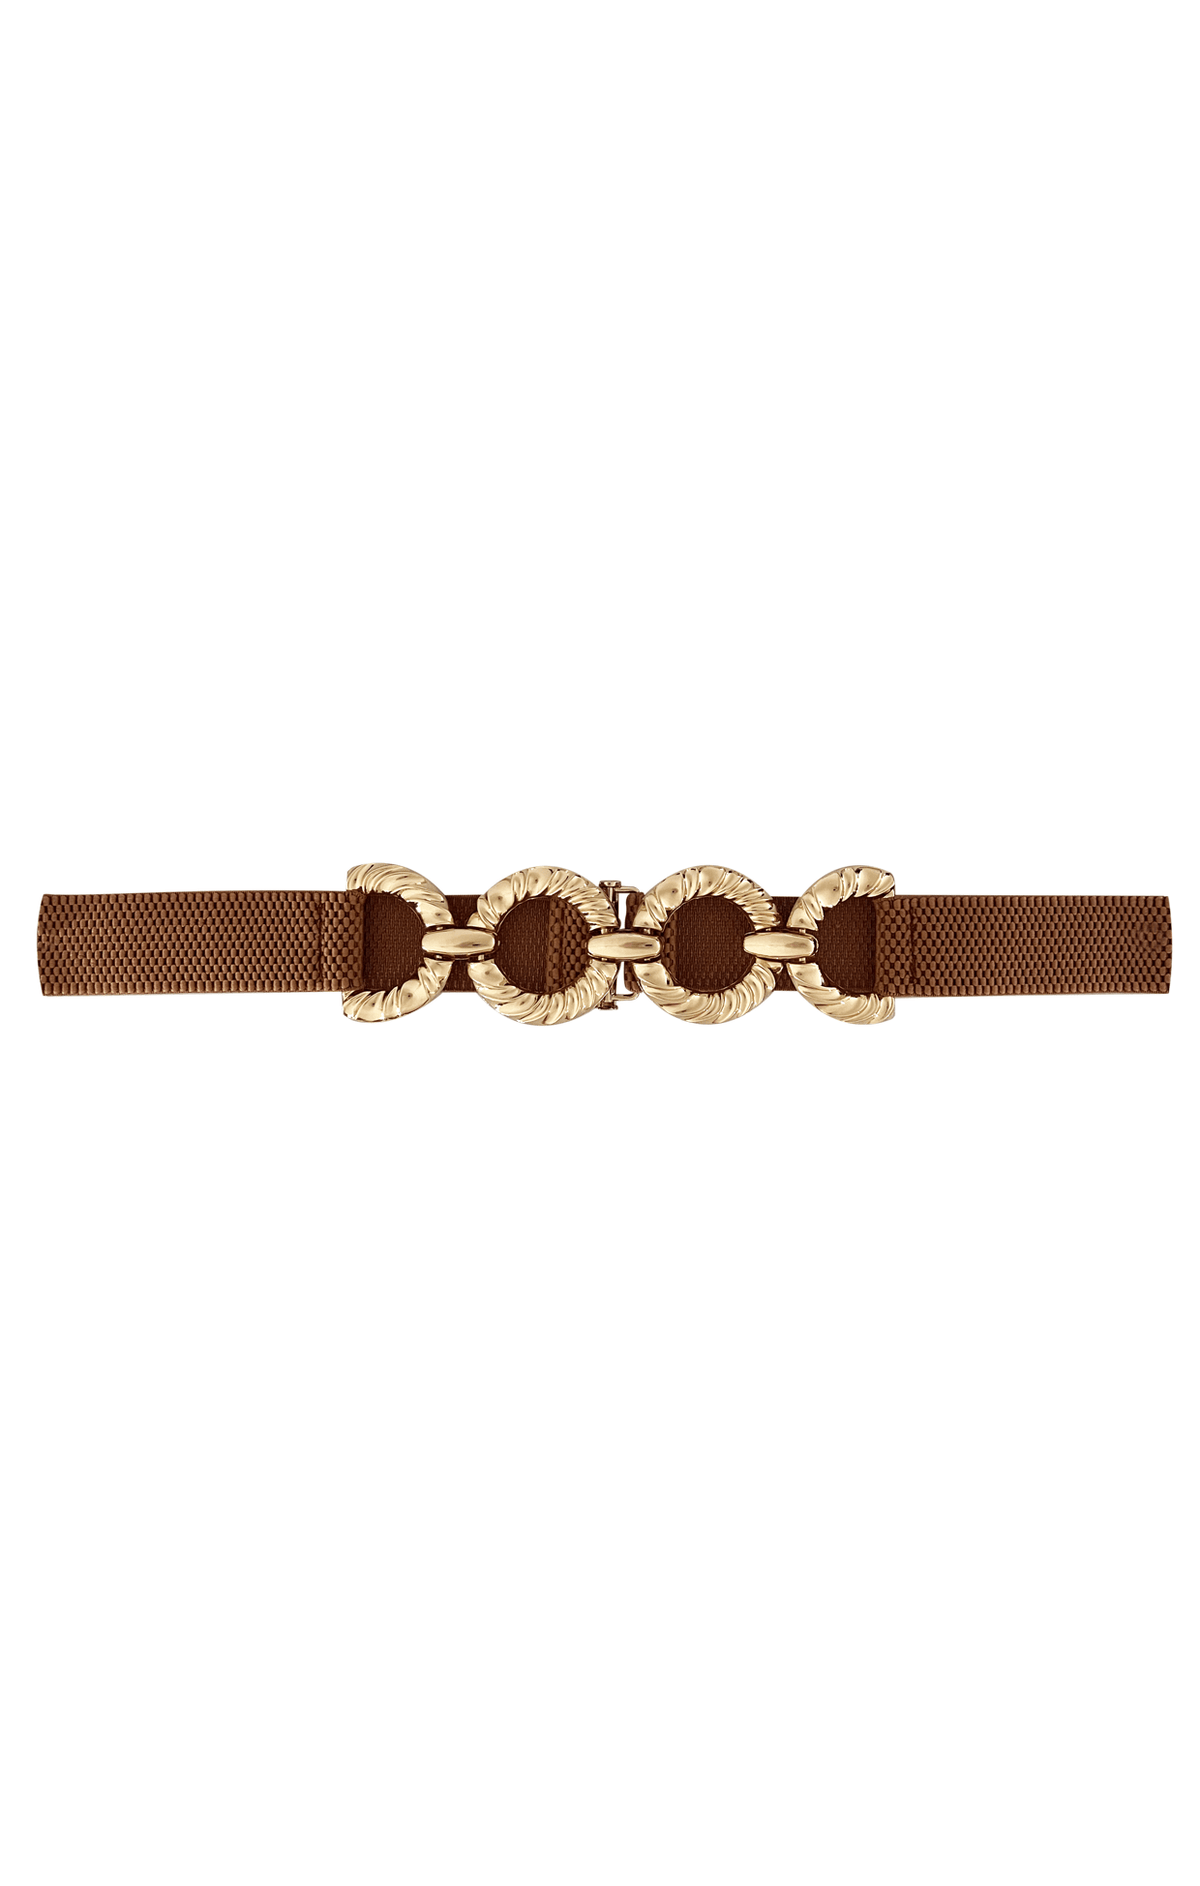 ACCESSORIES Belts OS / TAN CIRCLES PANEL FRONT STRETCH BELT IN TAN AND GOLD